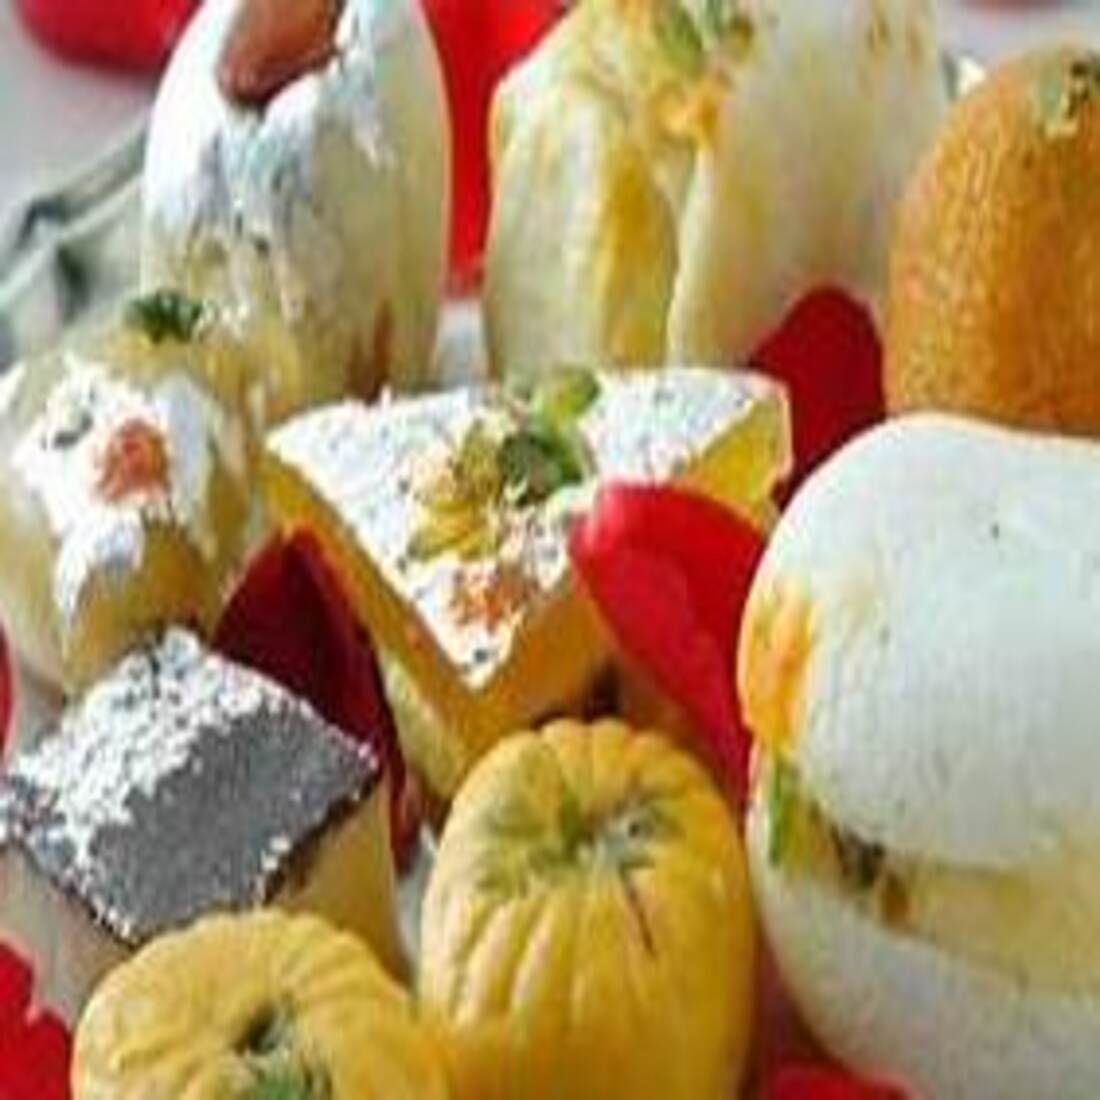 How is Bengali sweets different from other Indian sweets?